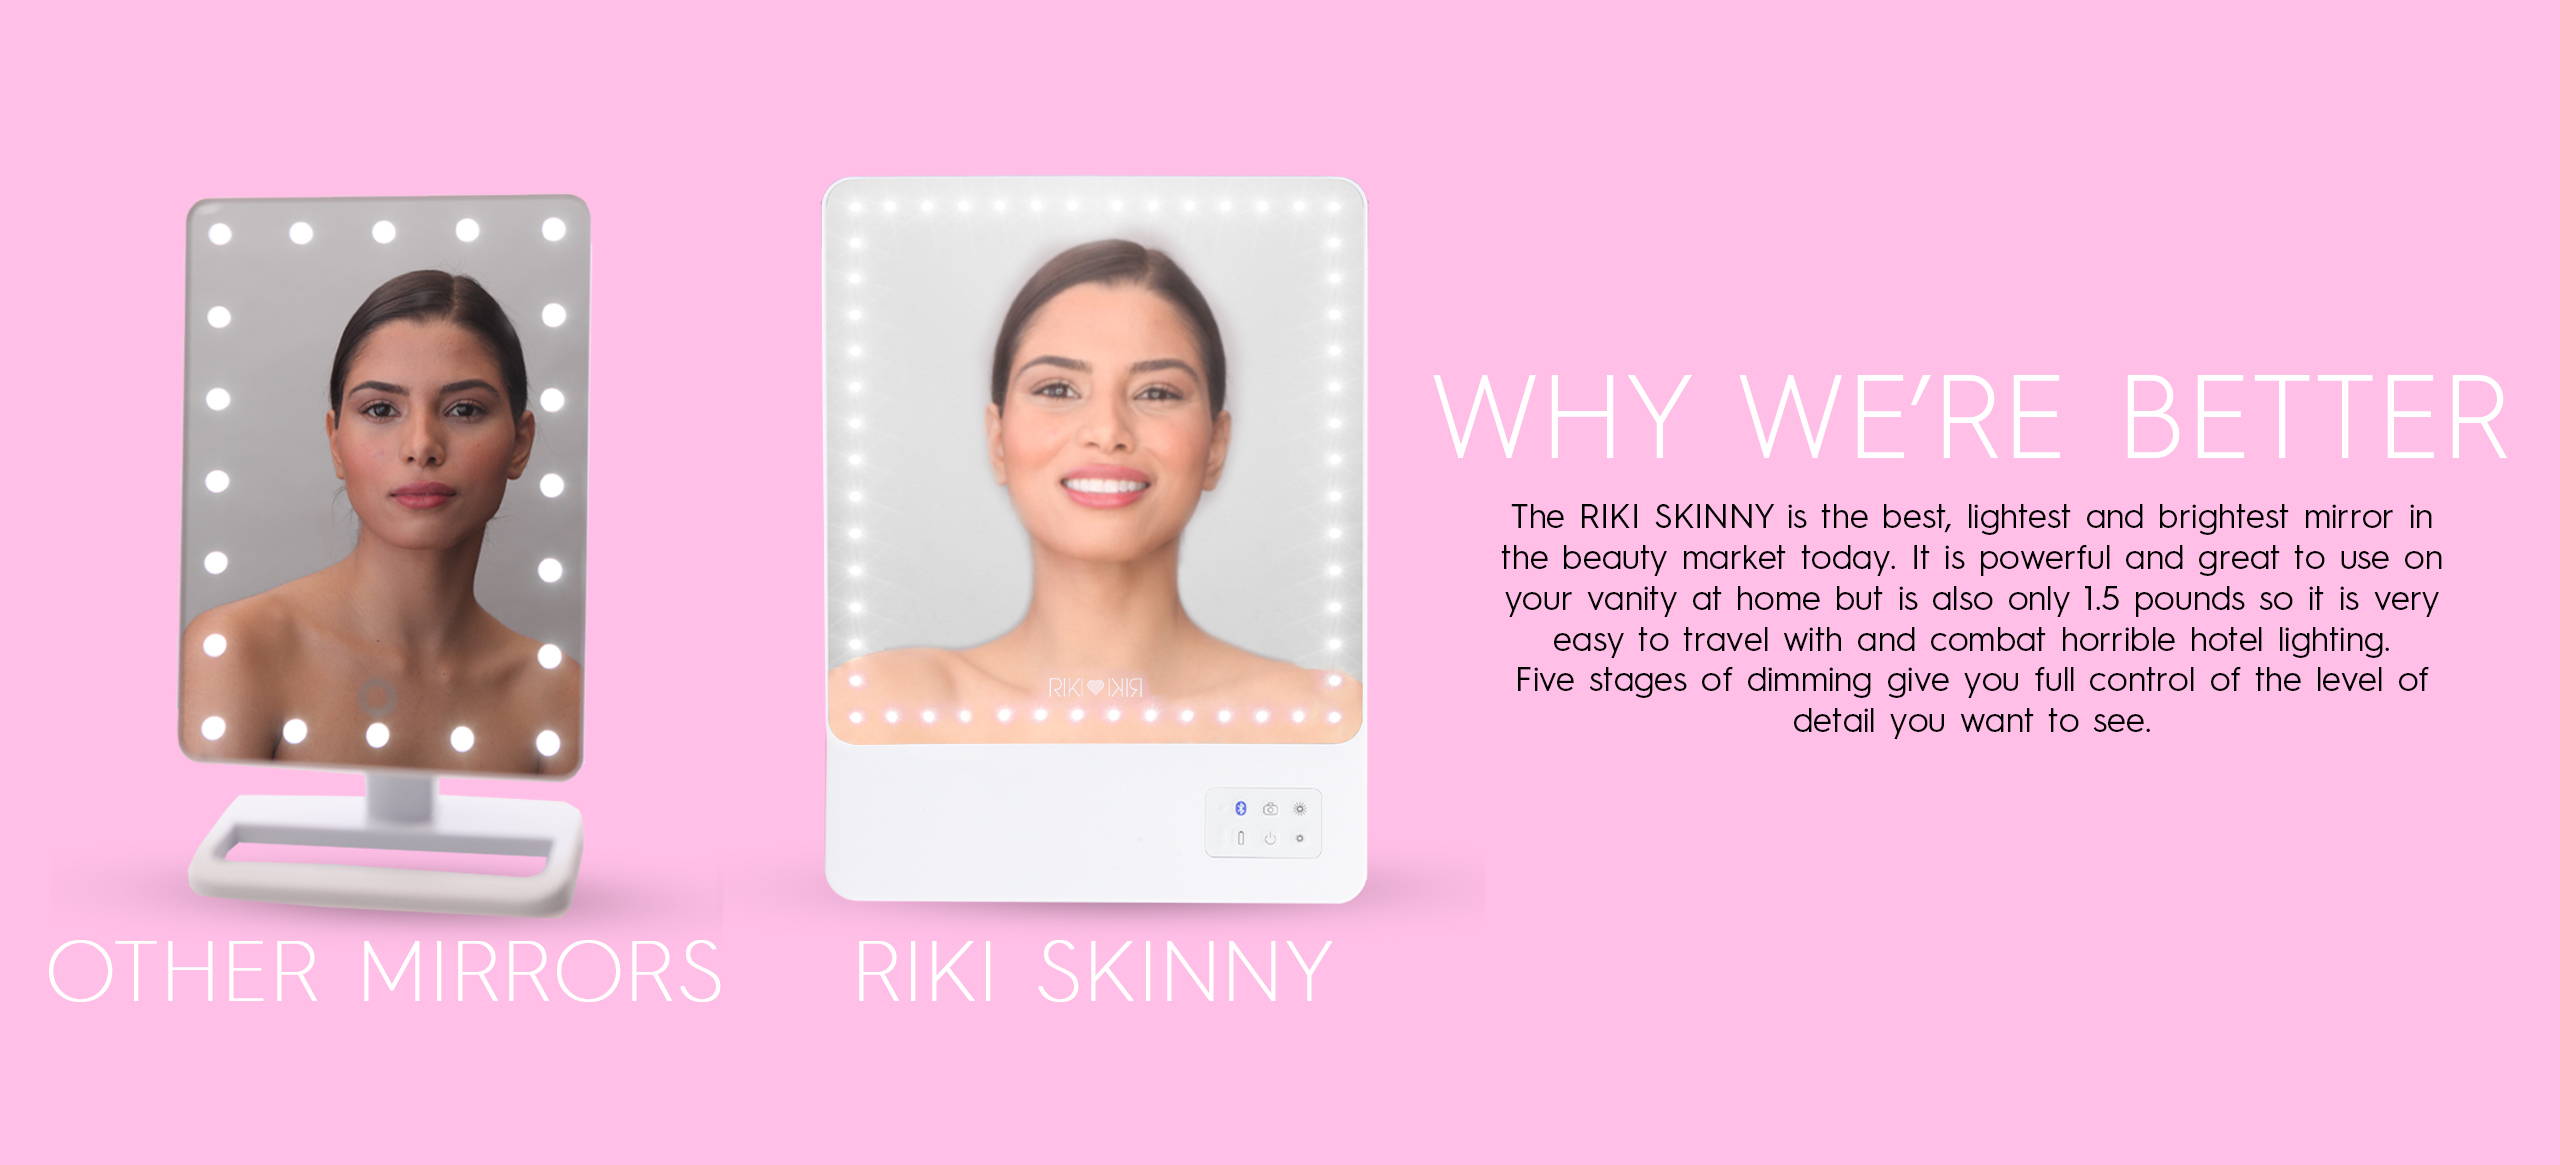 The RIKI SKINNY is the best, lightest and brightest mirror in the beauty market.